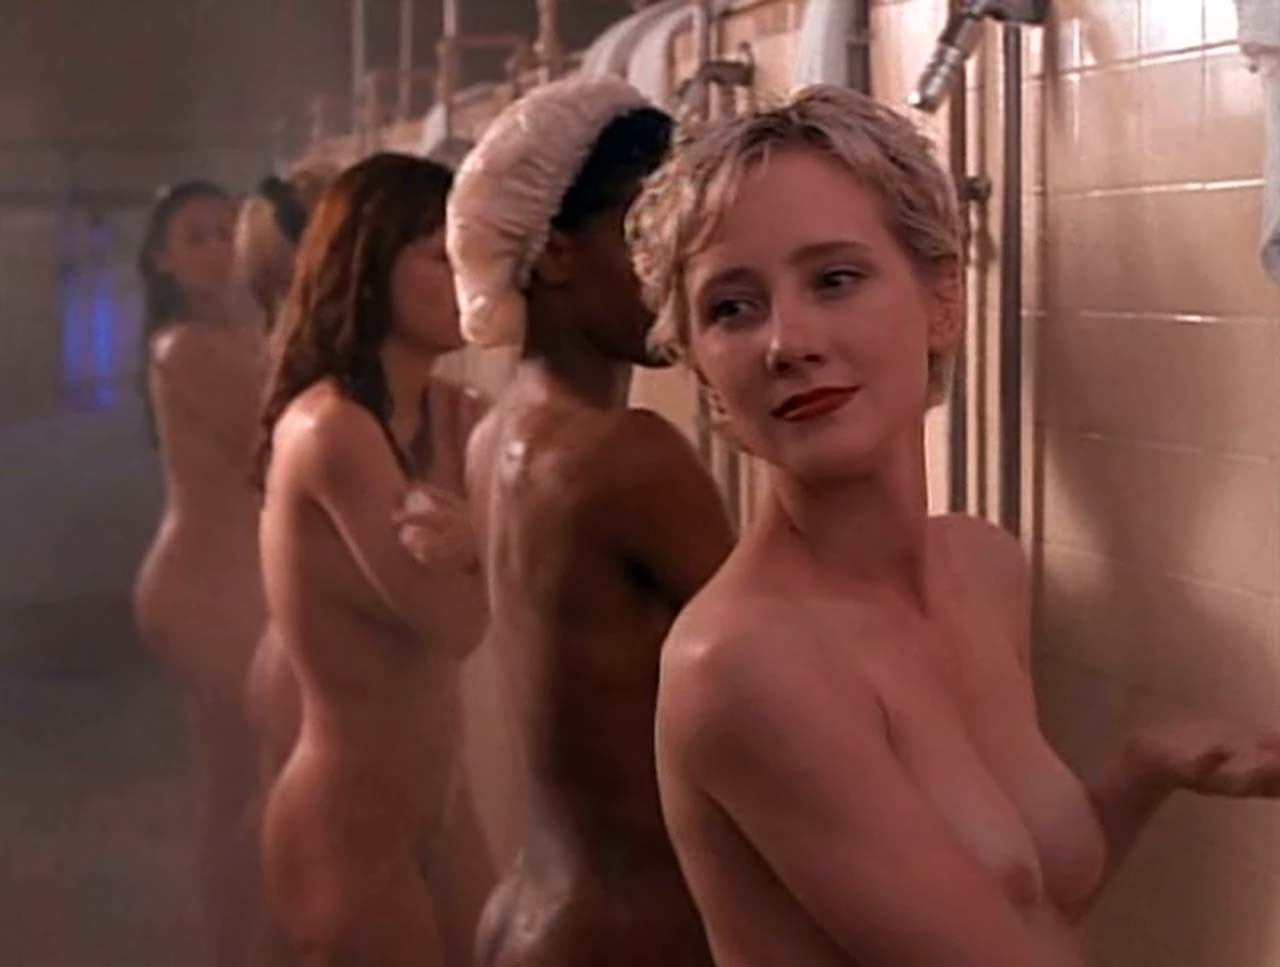 Rule 5 Saturday - The Reformed Lesbian Anne Heche.